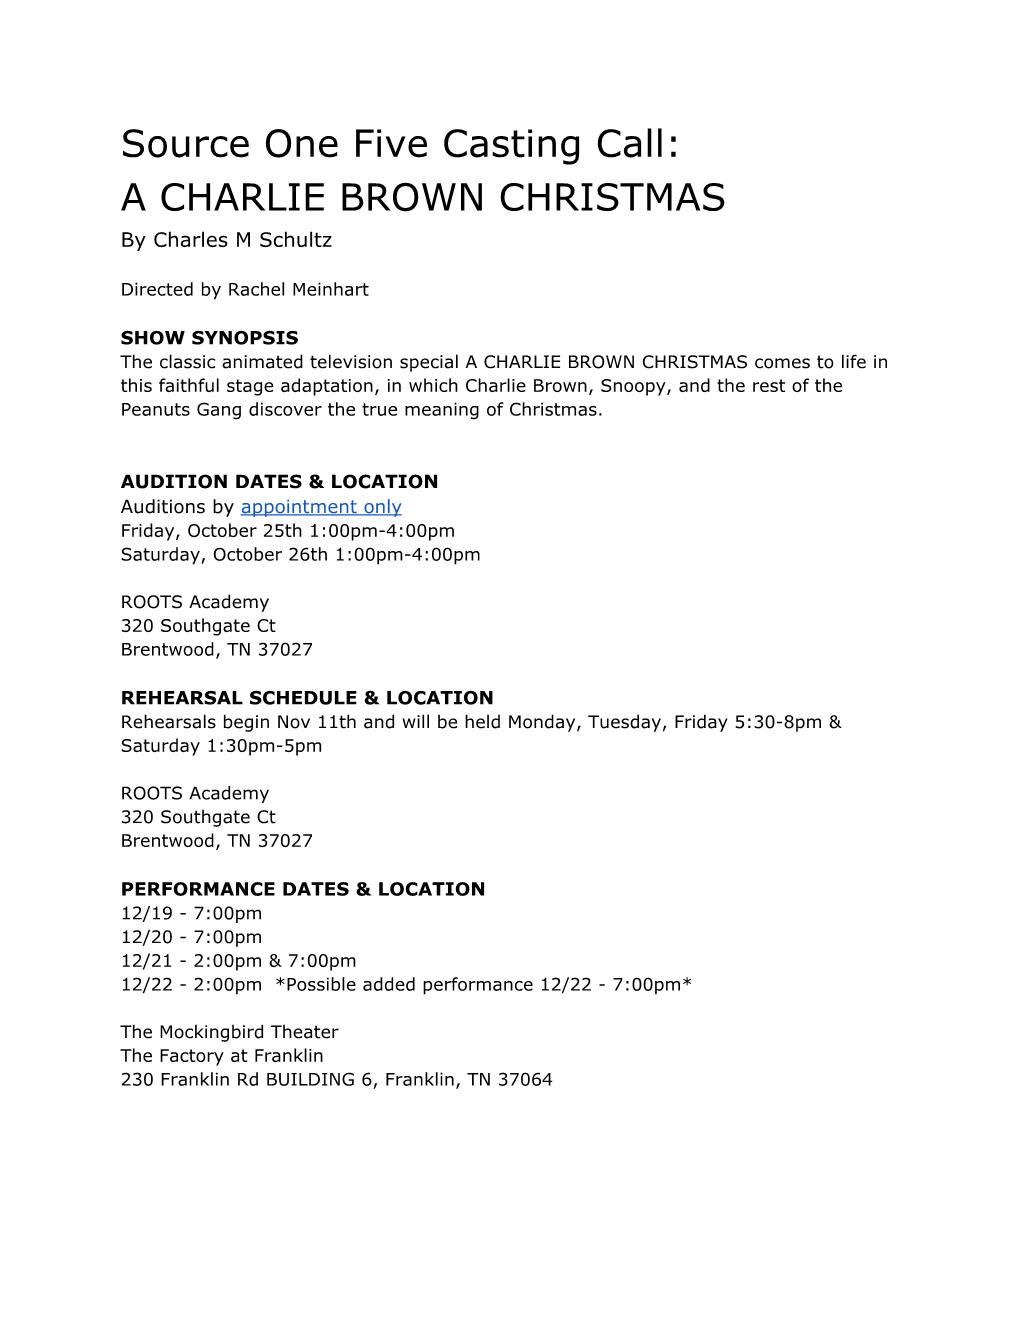 A CHARLIE BROWN CHRISTMAS by Charles M Schultz